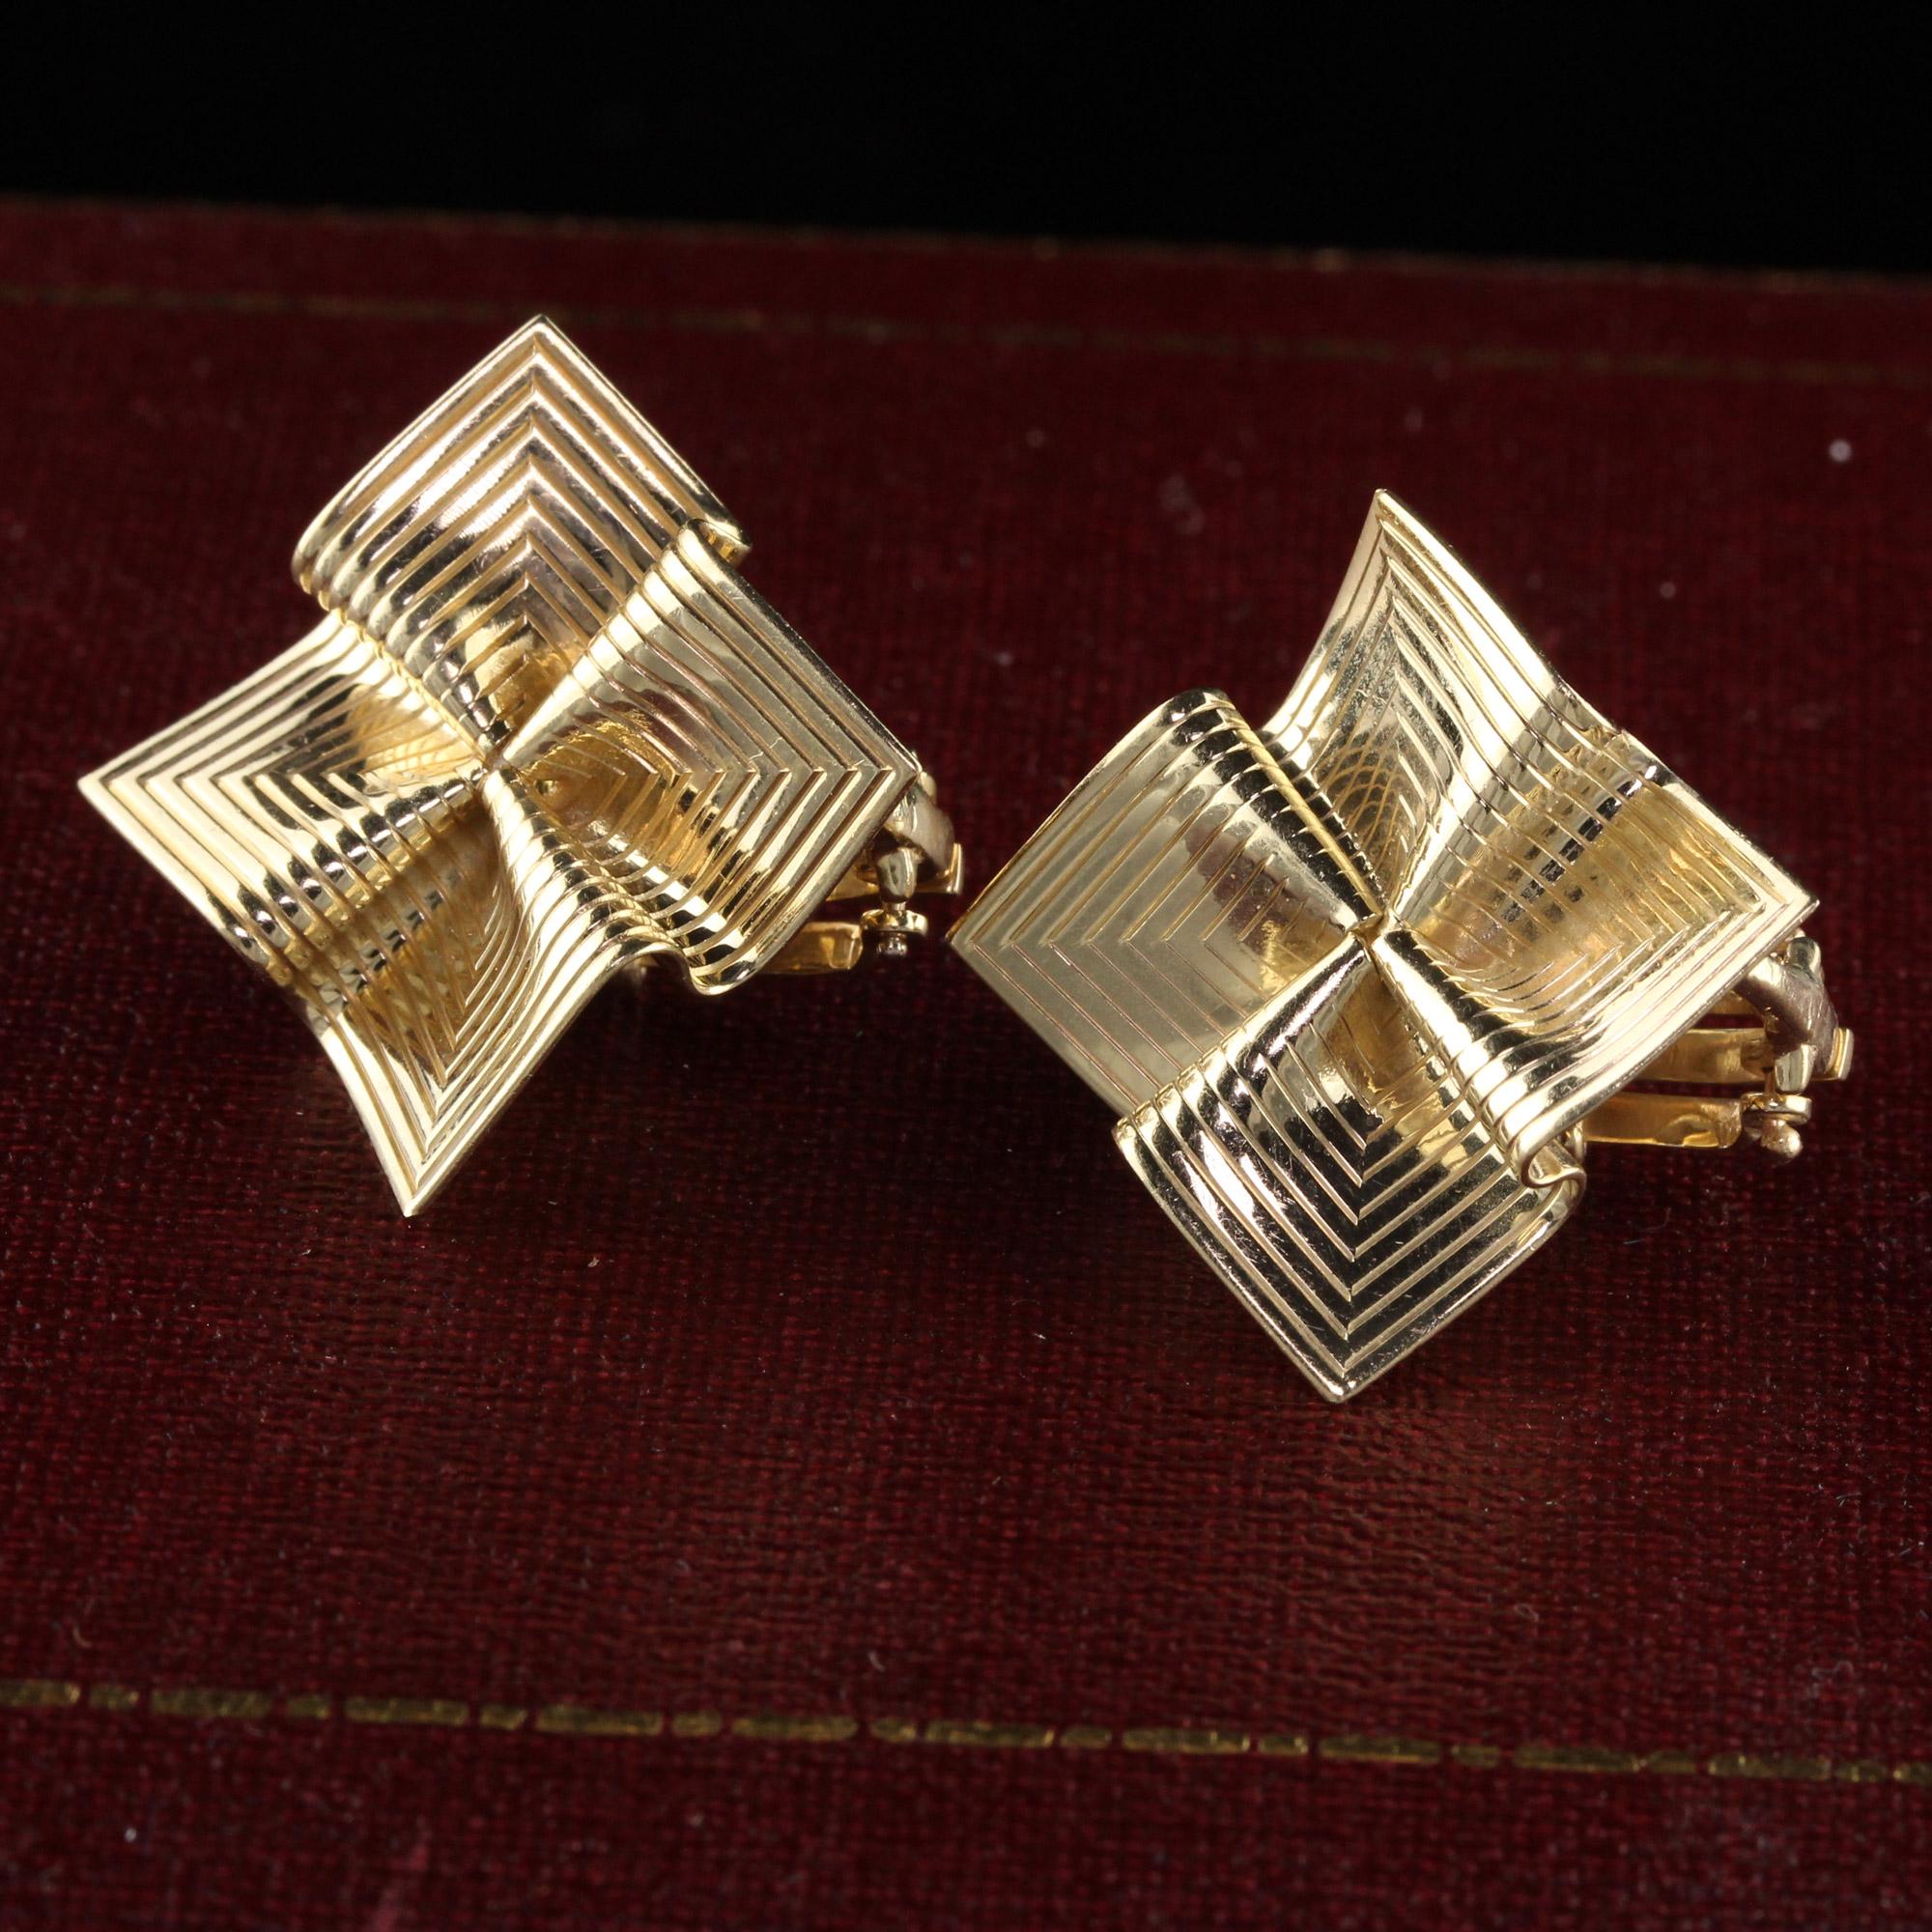 Beautiful Retro Vintage 14K Yellow Gold Origami Pin Wheel Earrings. These gorgeous Retro earrings are crafted in 14K yellow gold and have an amazing fabric like feel to them with engravings on the front. It looks like a pin wheel pattern and they